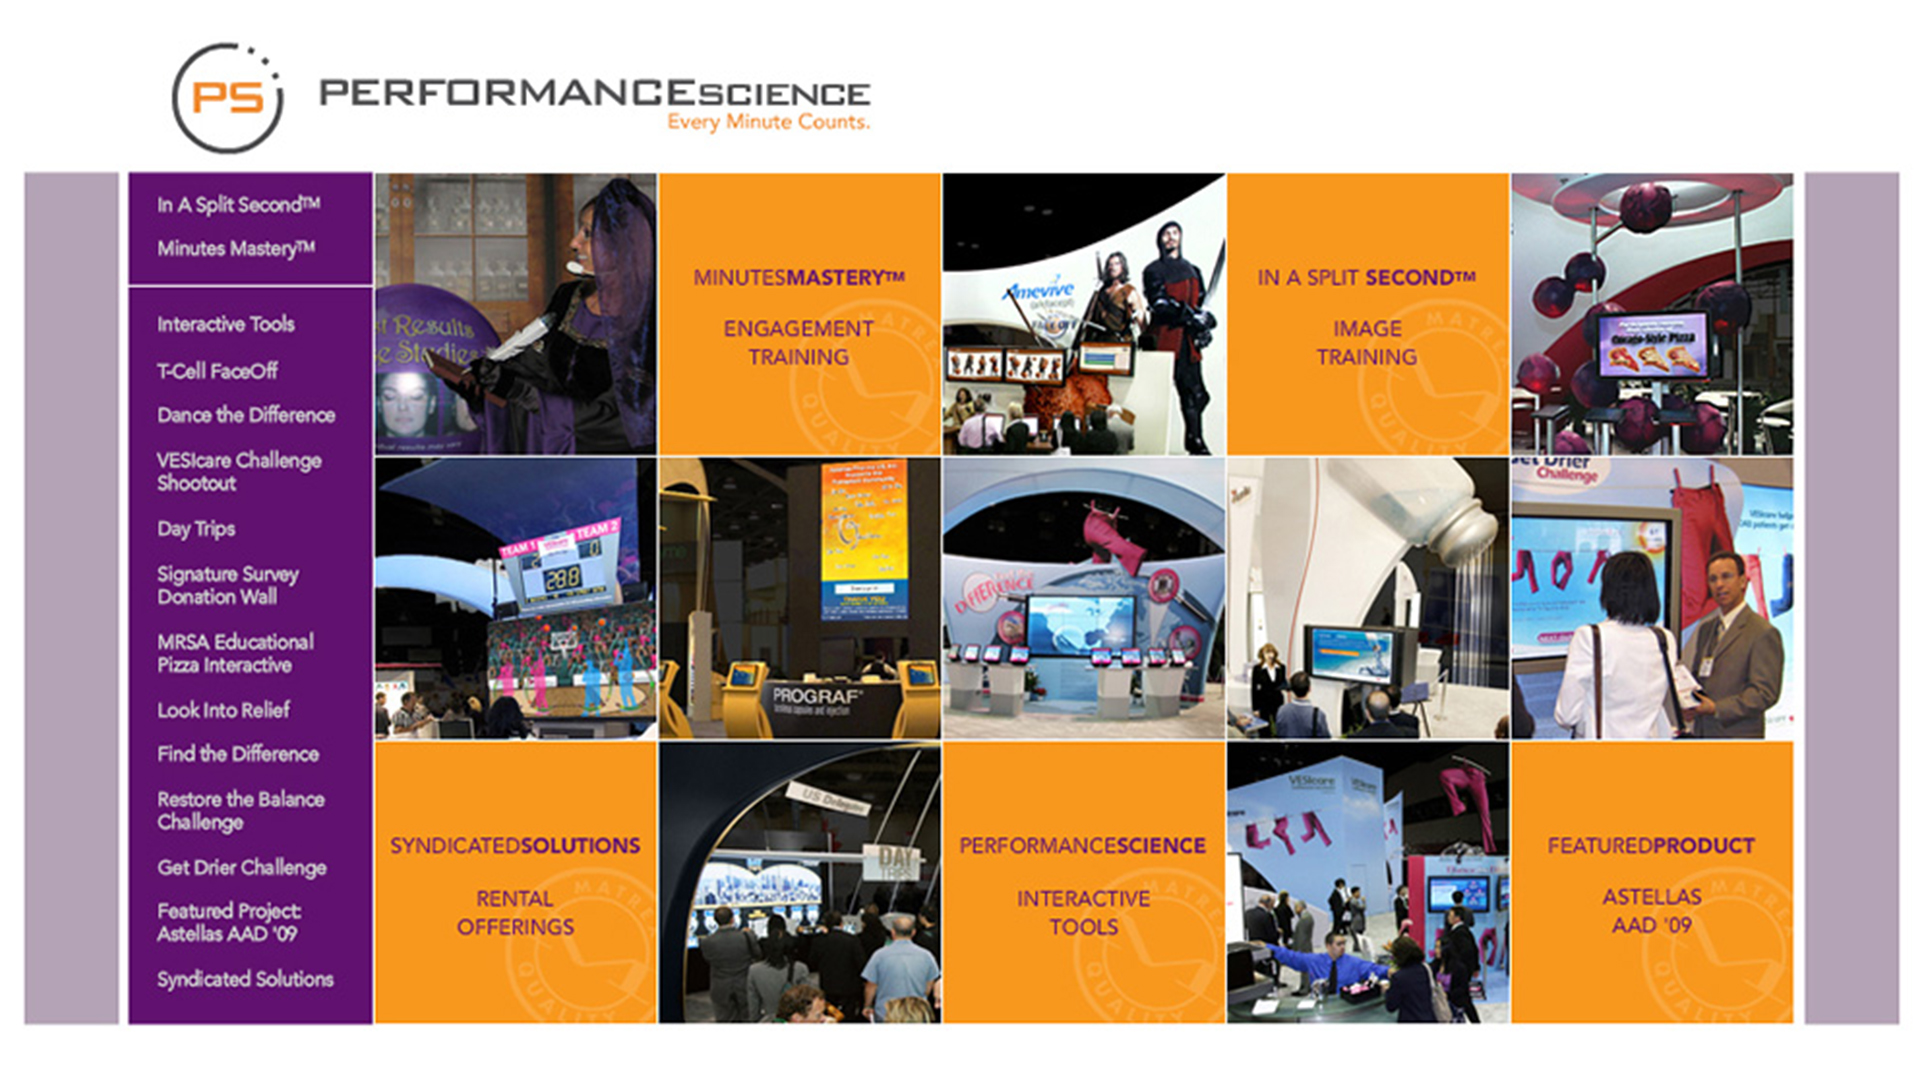 Matrex Exhibits’ Perspective Science Stand Alone Portfolio (CD Giveaway)